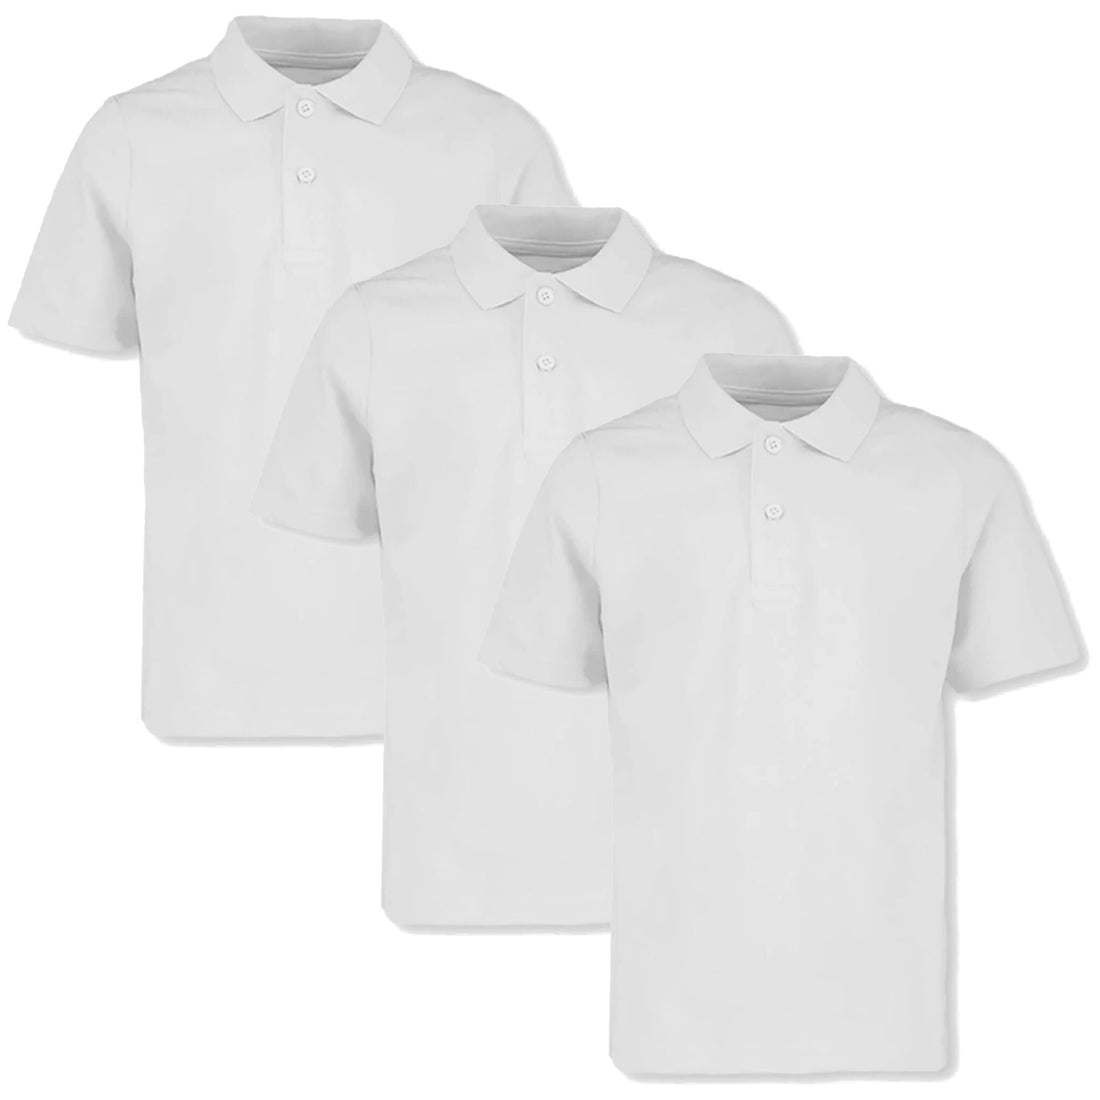 3 Pack Unisex Pure Cotton School Polo Shirts White (3-16 Years)